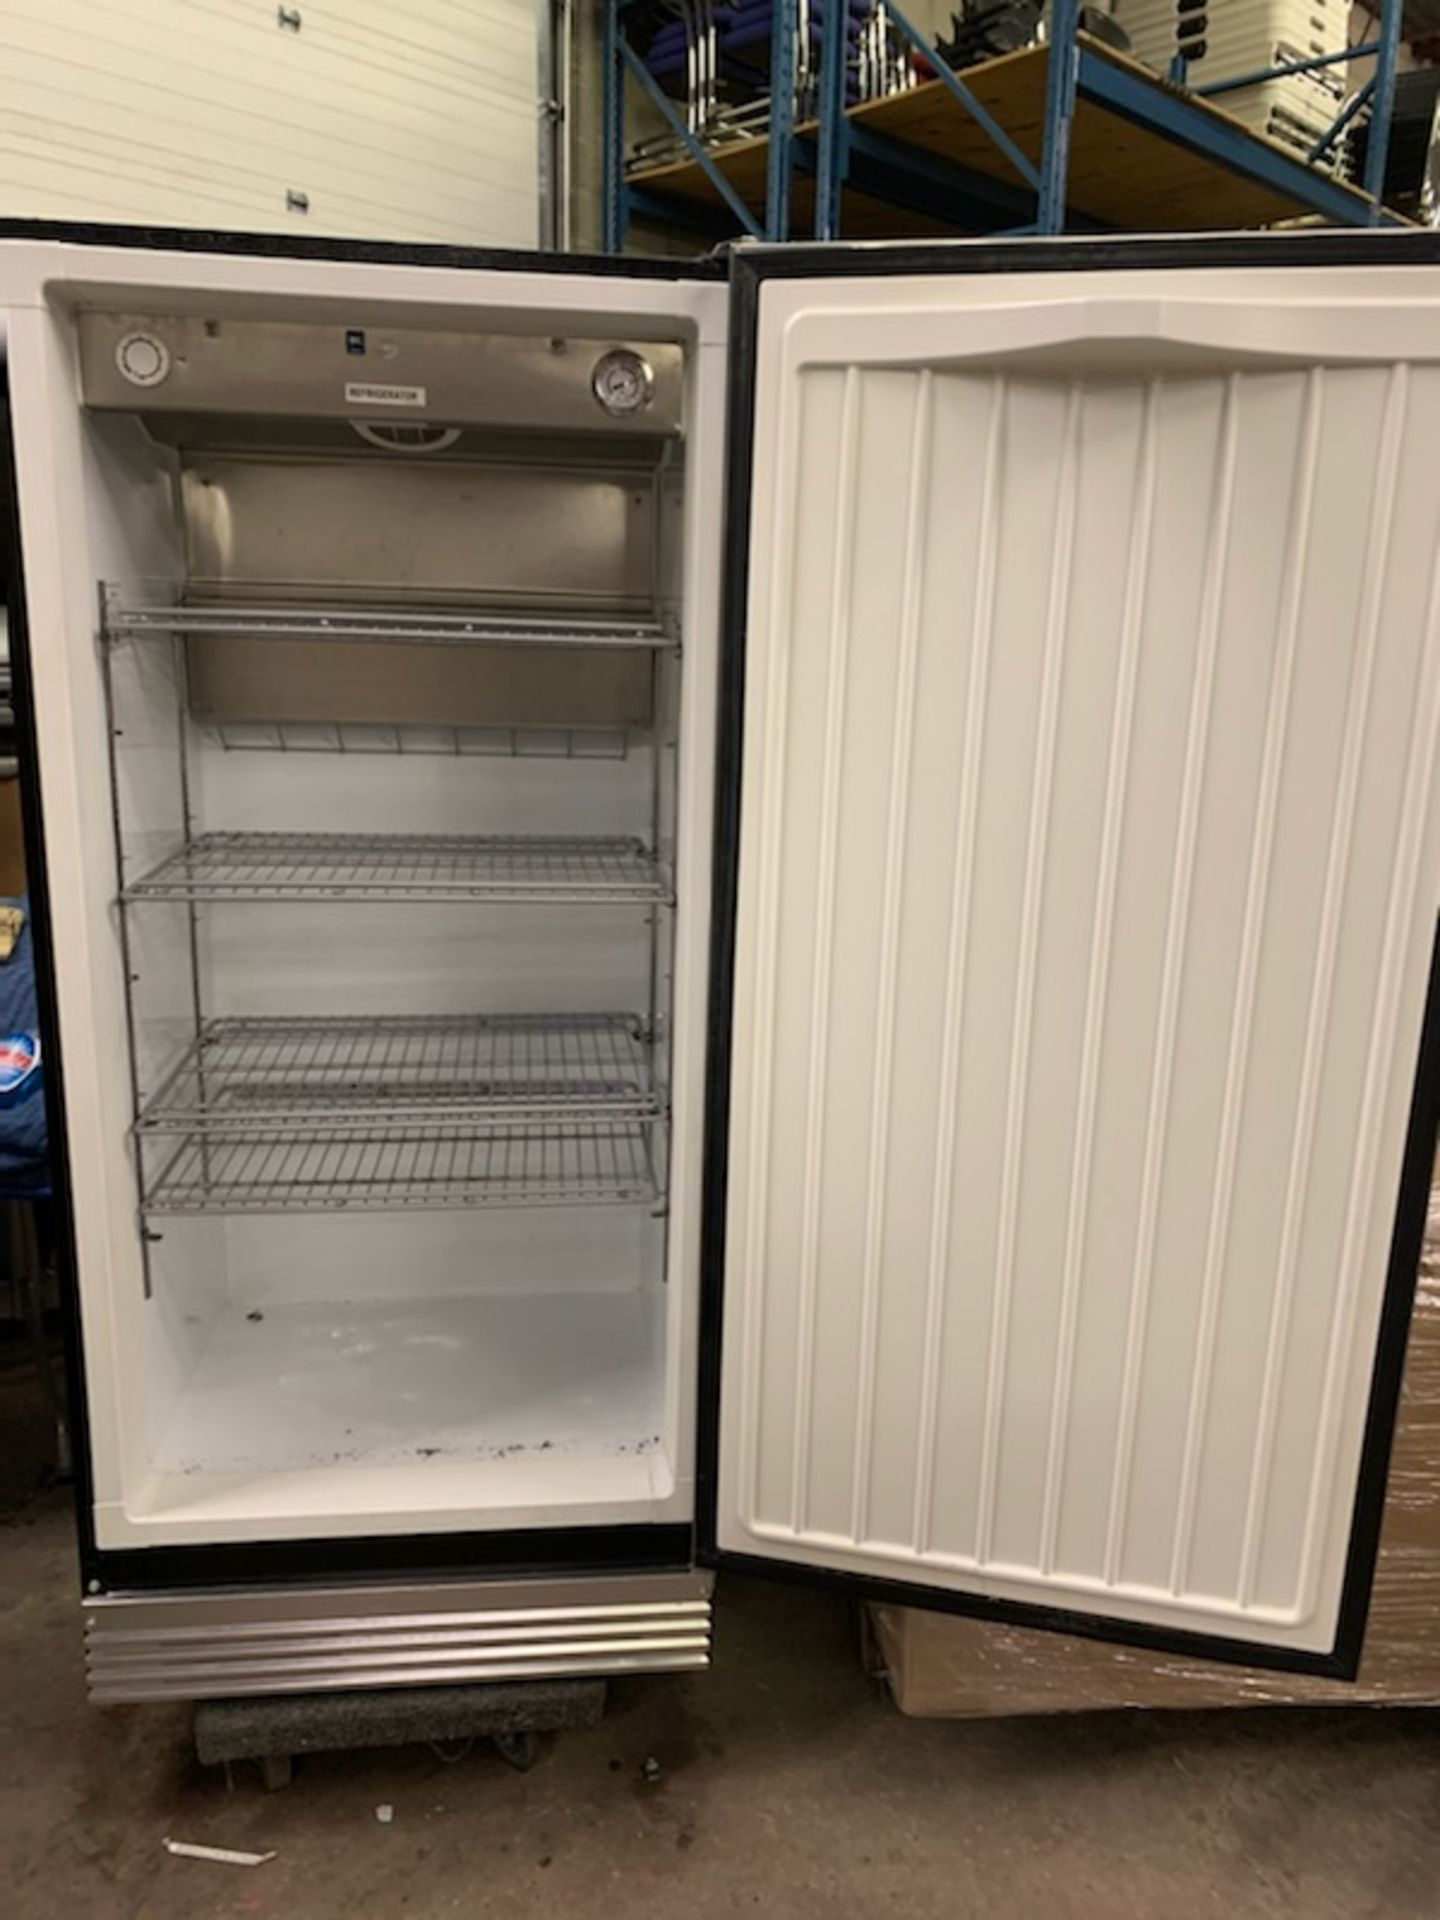 FRIDGIDAIRE FCRS201RFB4 STAINLESS STEEL SINGLE DOOR REFRIGERATOR (LOCATED IN NORTH YORK, ON) - Image 2 of 3